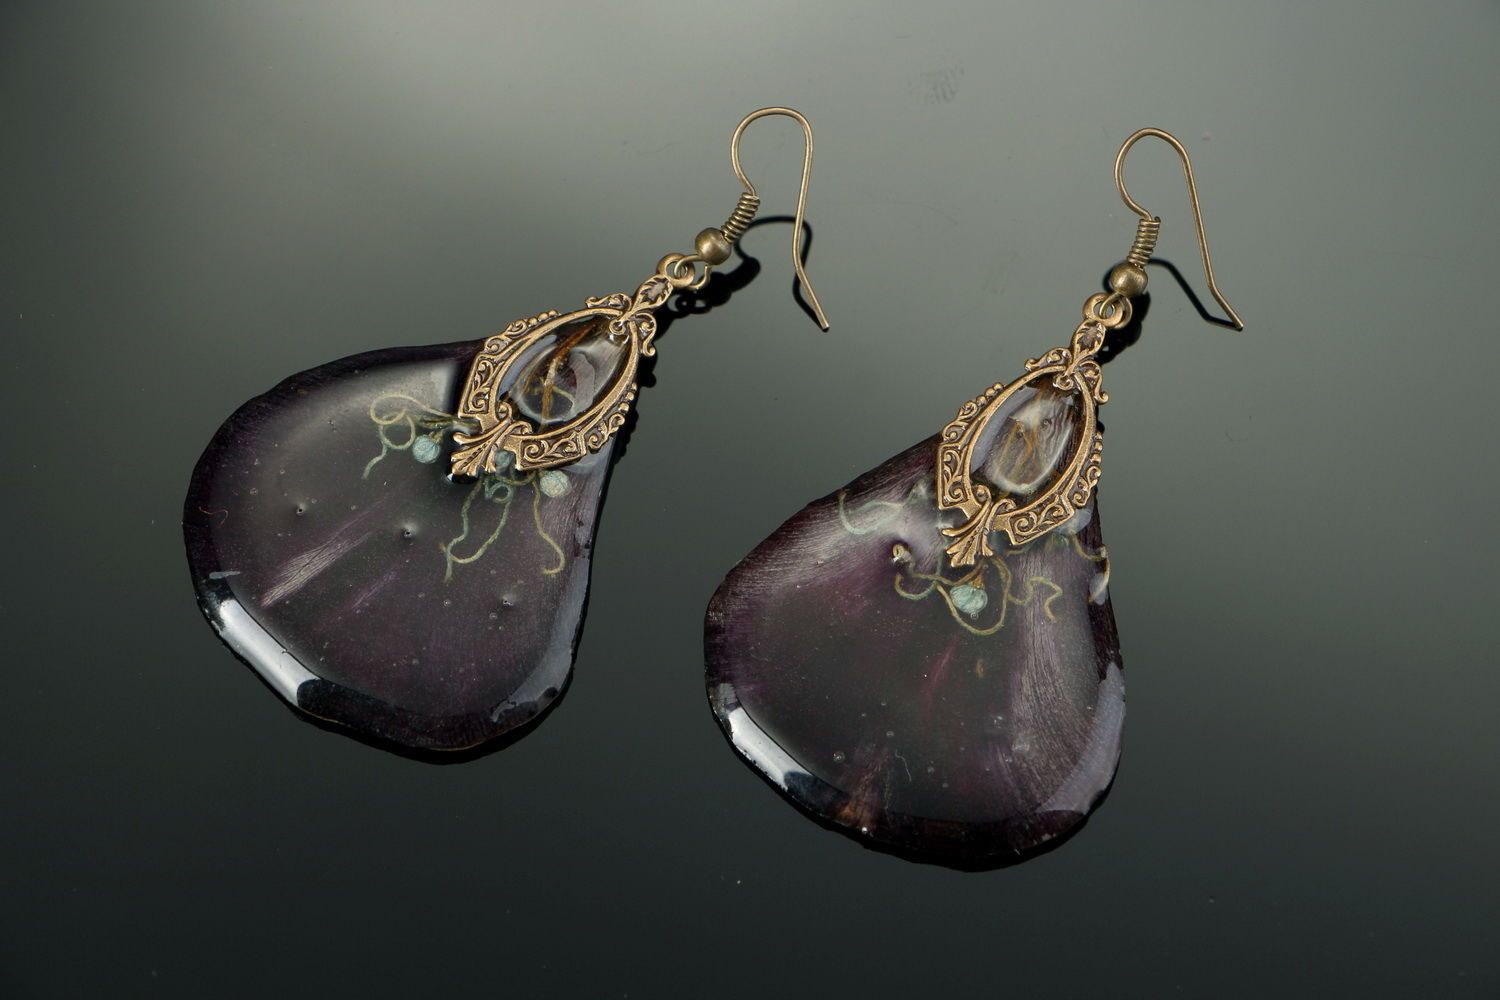 Earrings made of tulips and covered with epoxy resin photo 1